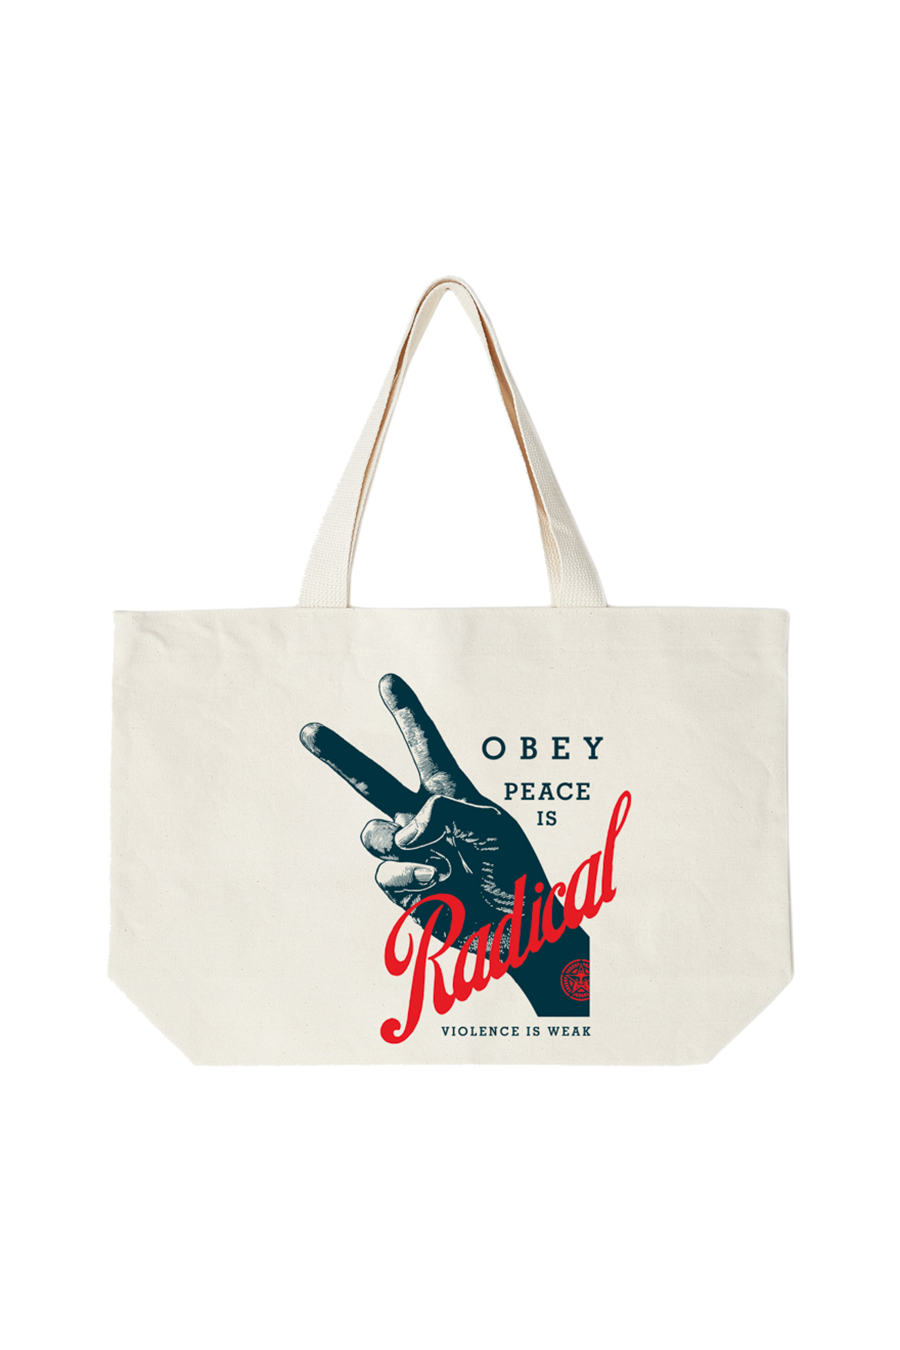 Obey Radical Peace Tote | Natural - Main Image Number 1 of 2